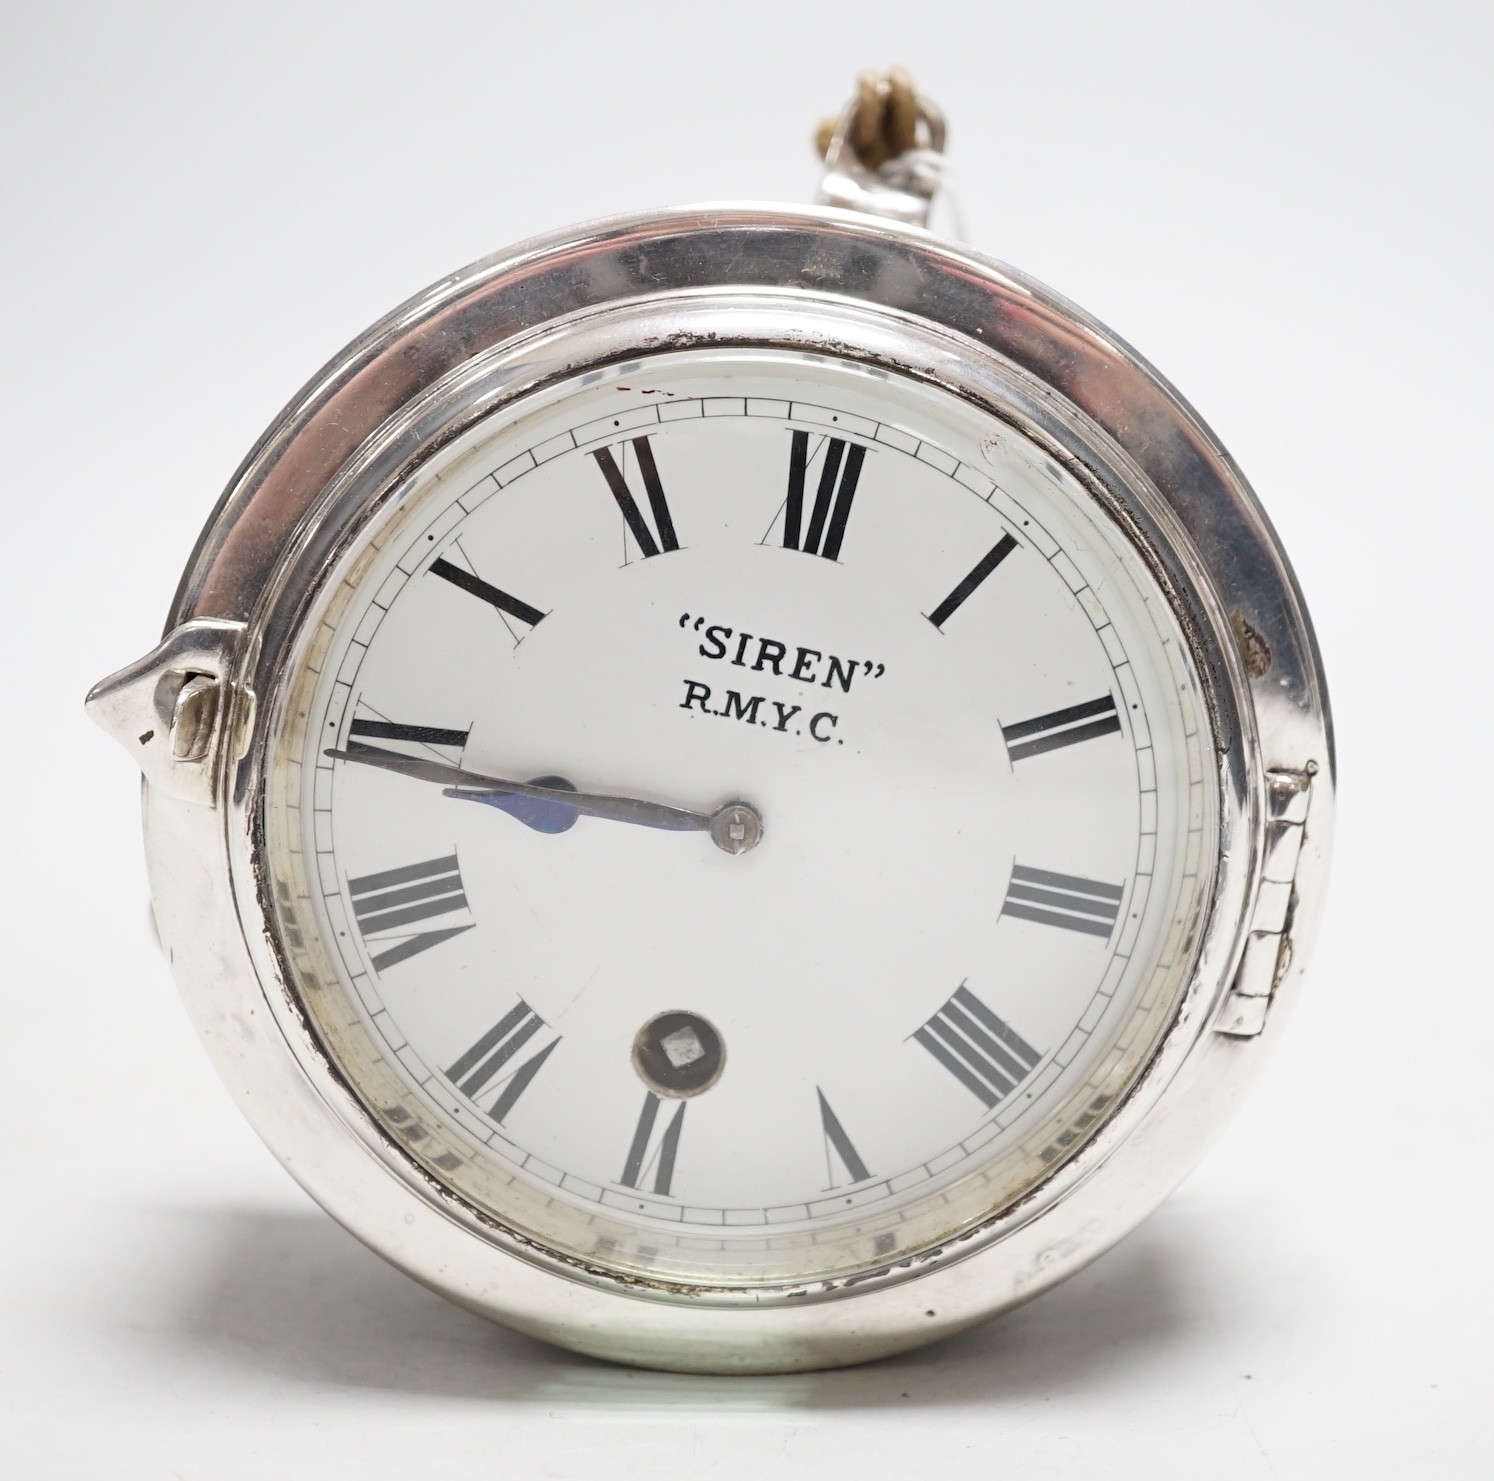 A small silver plated ship's clock, inscribed ‘Siren’ R.M.Y.C.